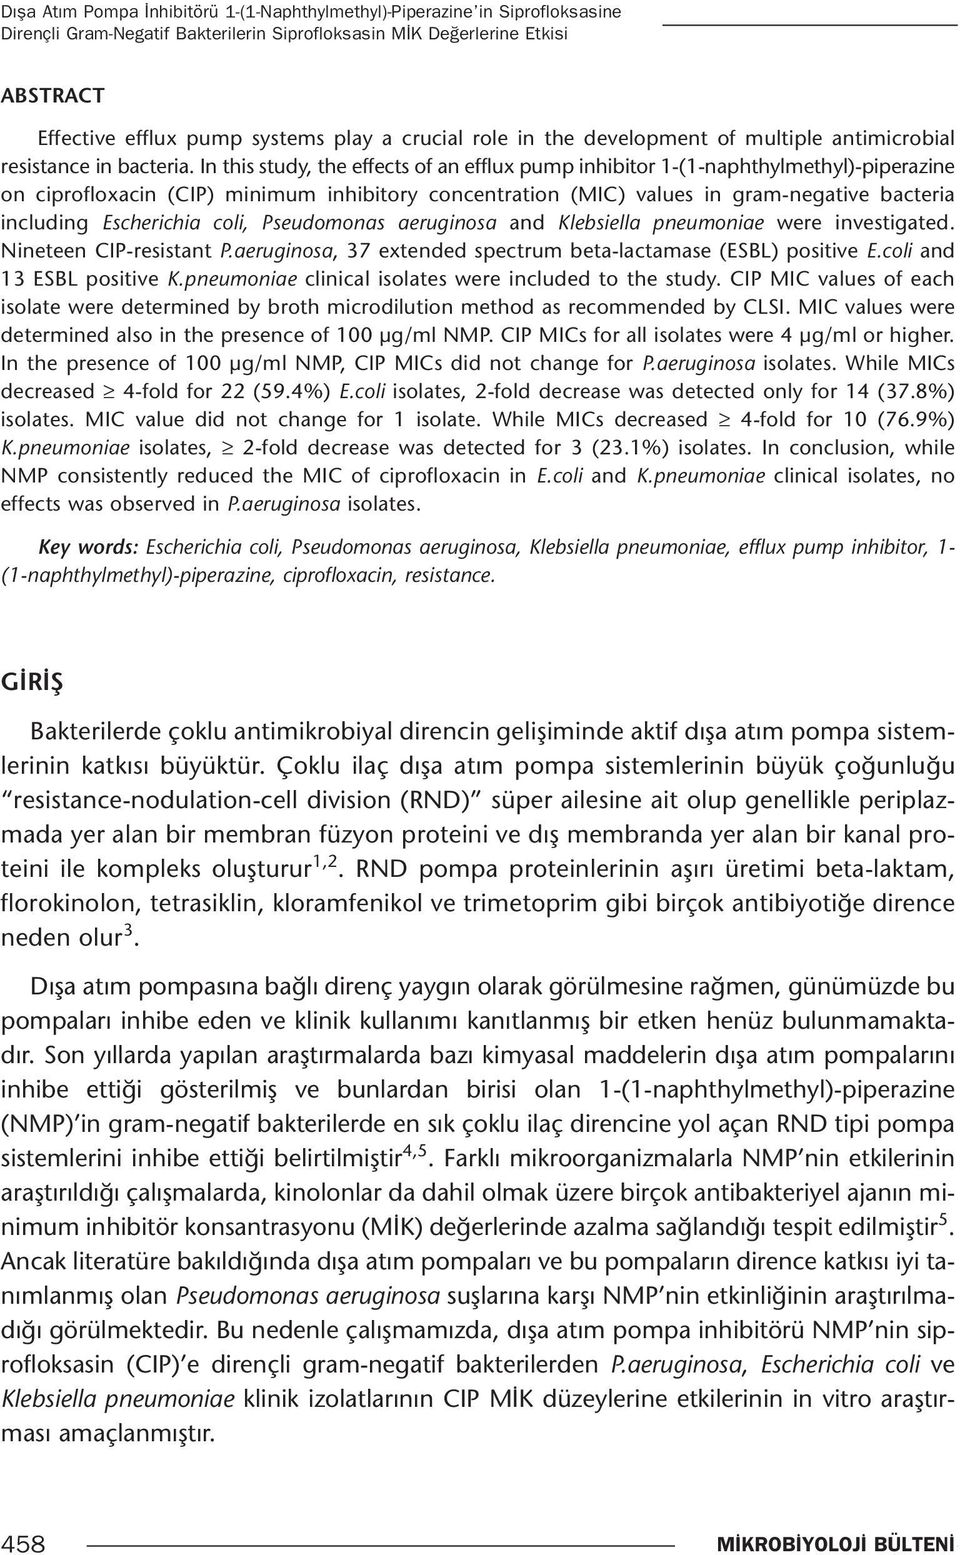 In this study, the effects of an efflux pump inhibitor 1-(1-naphthylmethyl)-piperazine on ciprofloxacin (CIP) minimum inhibitory concentration (MIC) values in gram-negative bacteria including